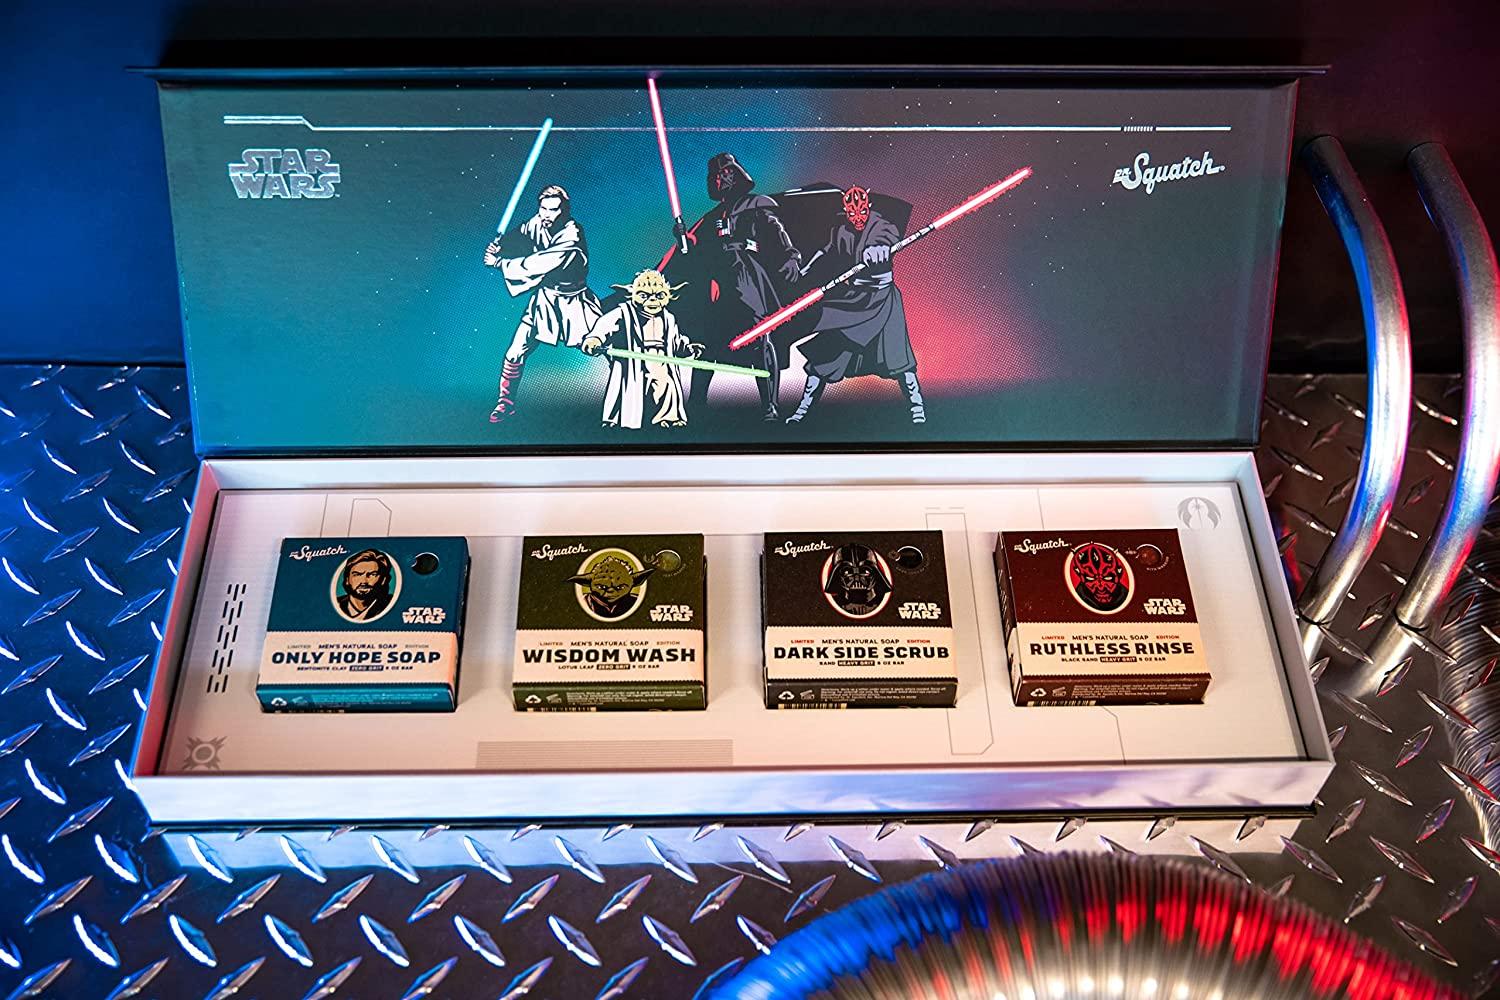  Dr. Squatch Soap Star Wars Soap Collection Episode I with  Collector's Box - Men's Natural Bar Soap - 4 Bar Soap Bundle and Collector's  Box Star Wars Natural Soap for